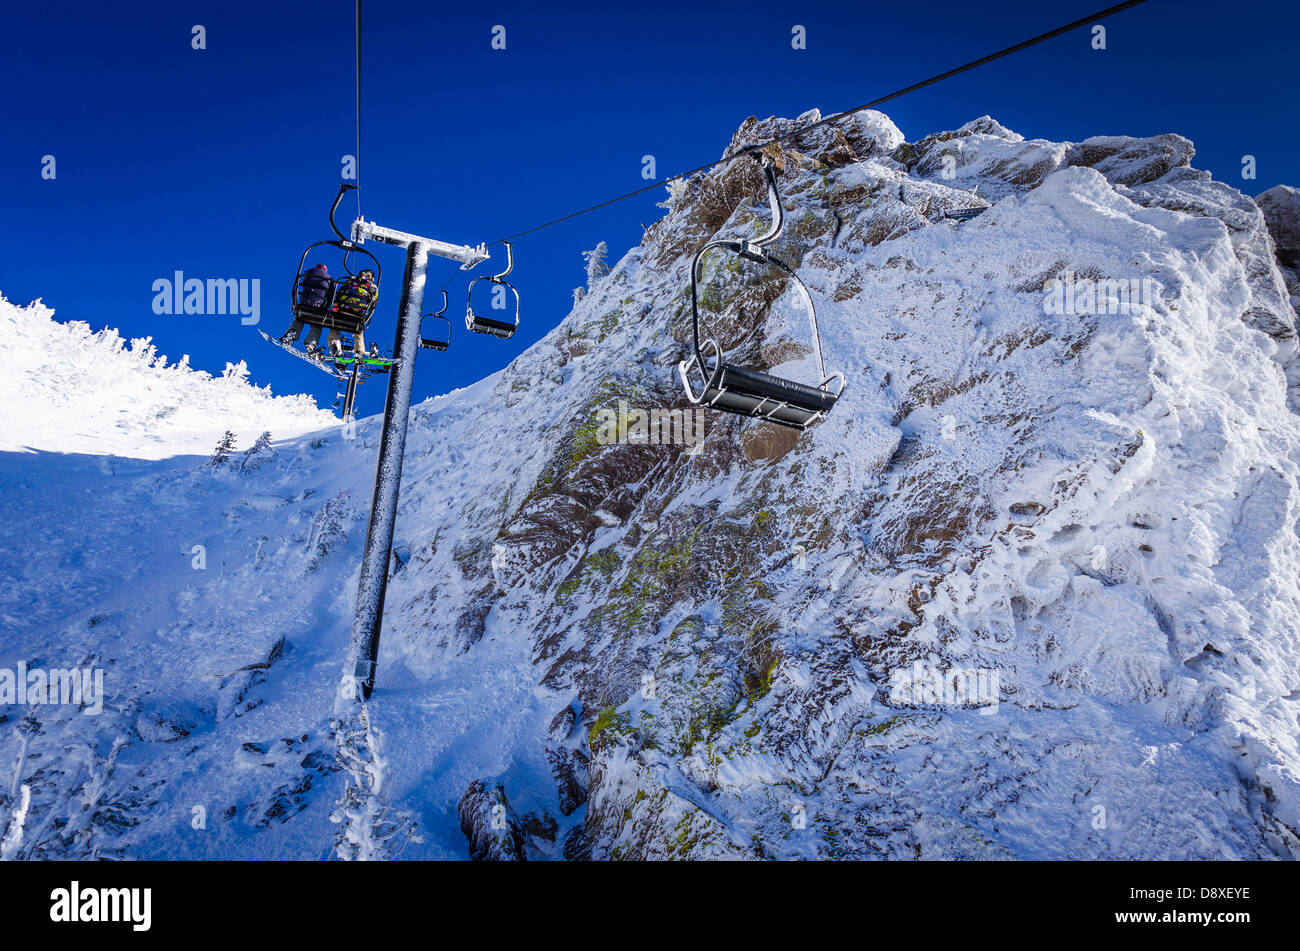 Chairlift covered in rime ice, Mammoth Mountain Ski Area, Mammoth Lakes, California USA Stock Photo